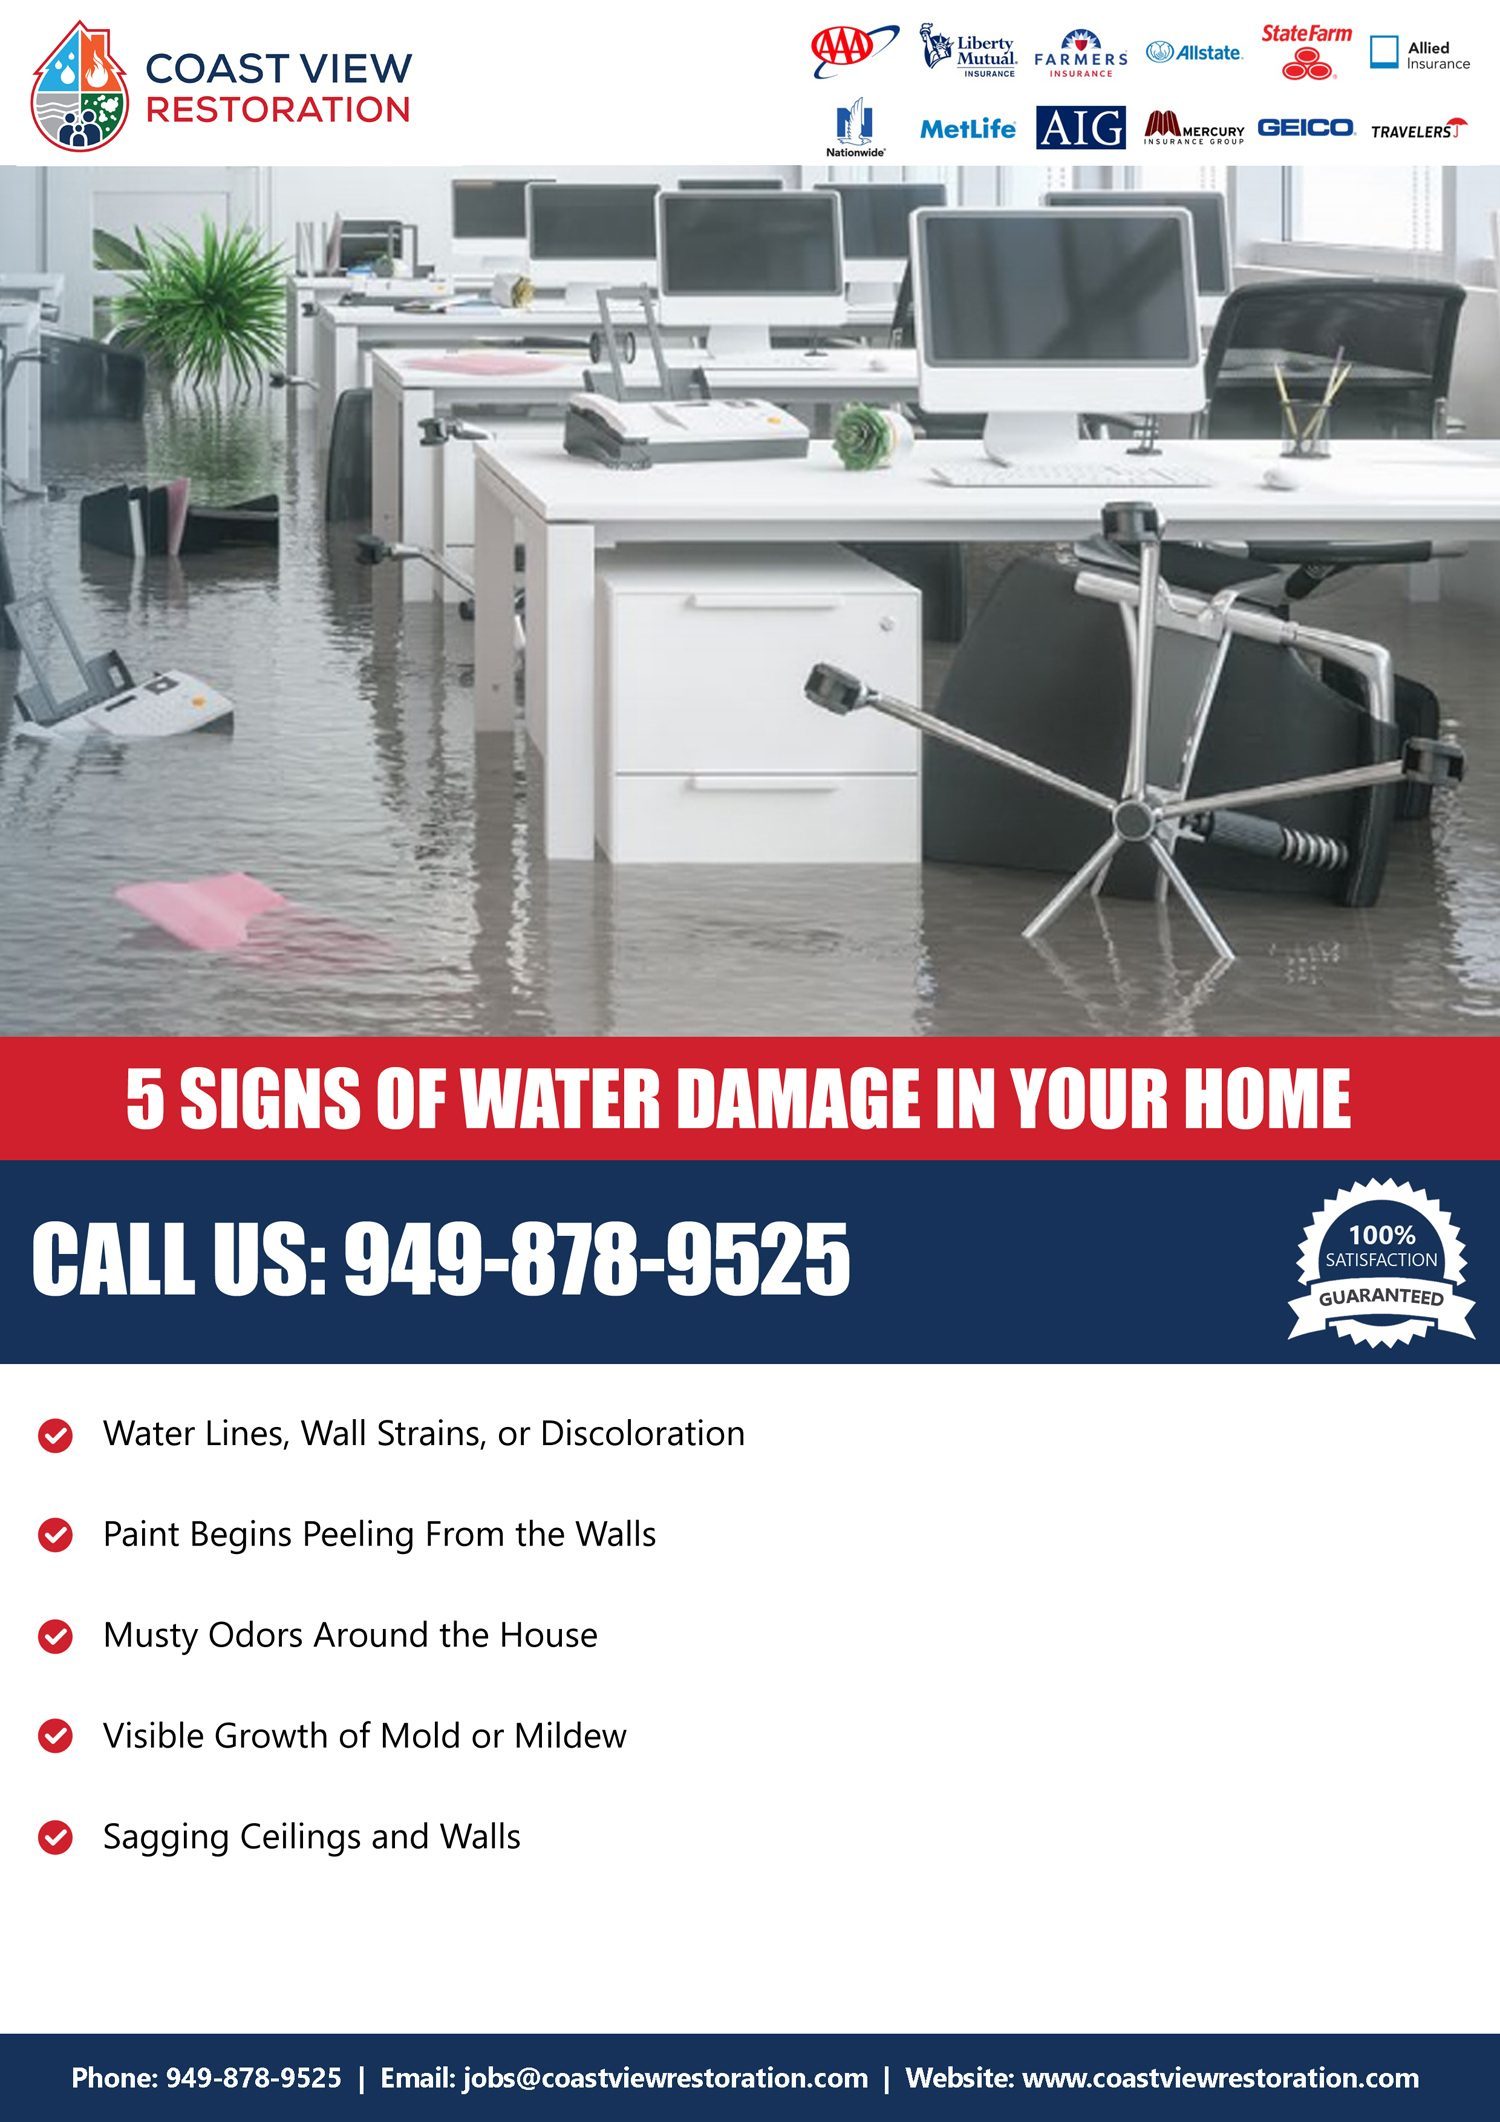 5 Signs of Water Damage in your Home